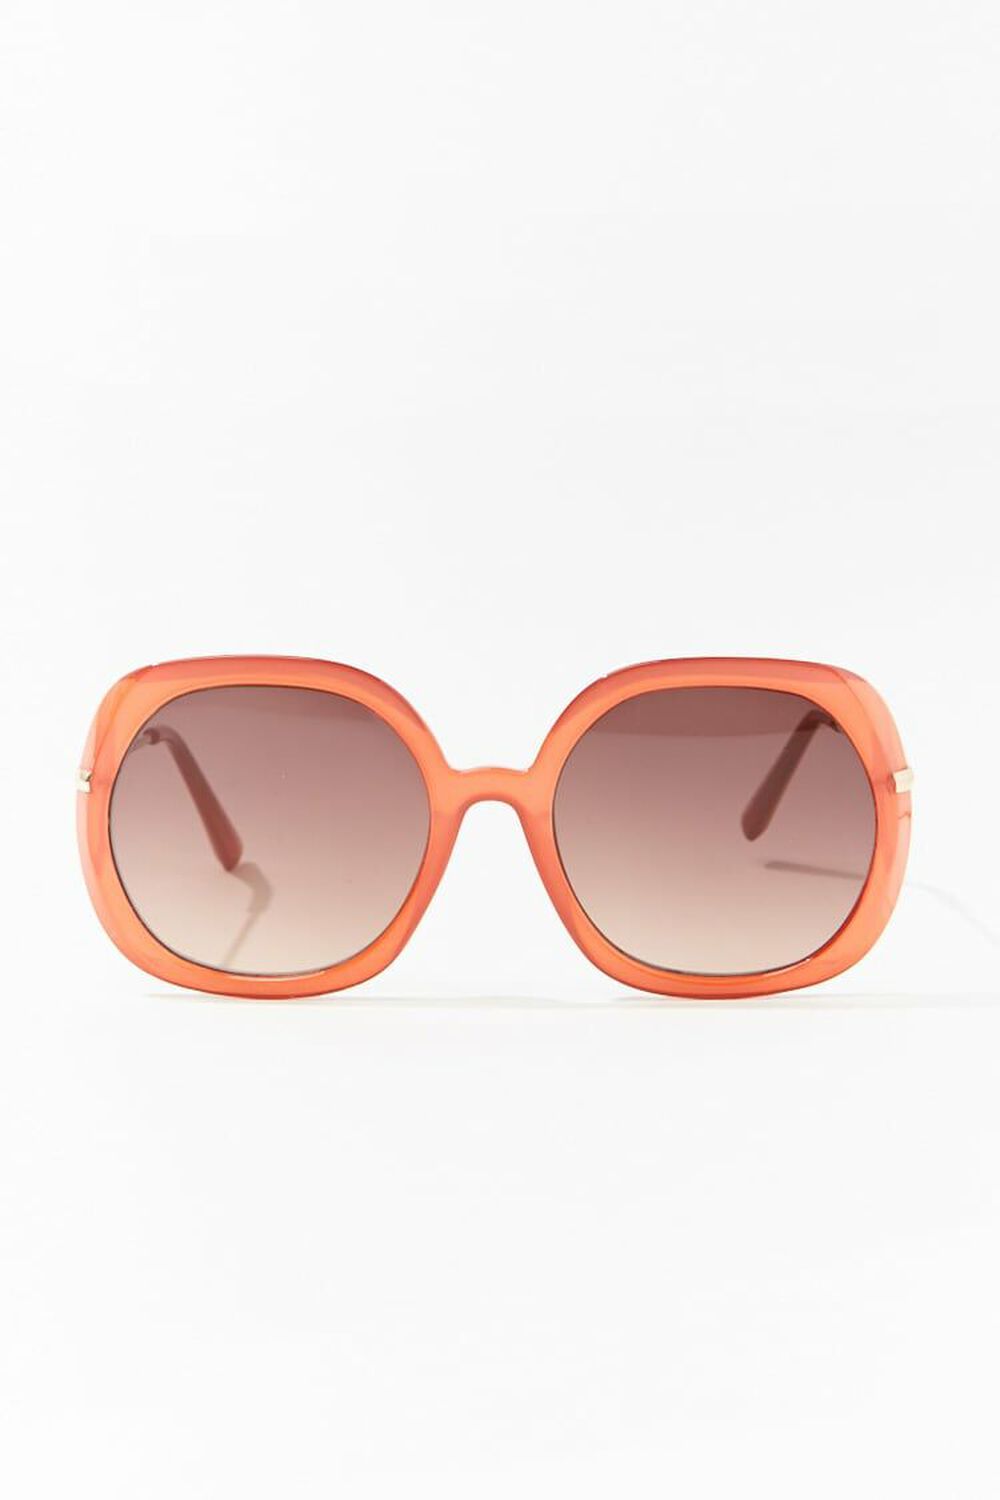 RUST/BROWN Square Tinted Sunglasses, image 1